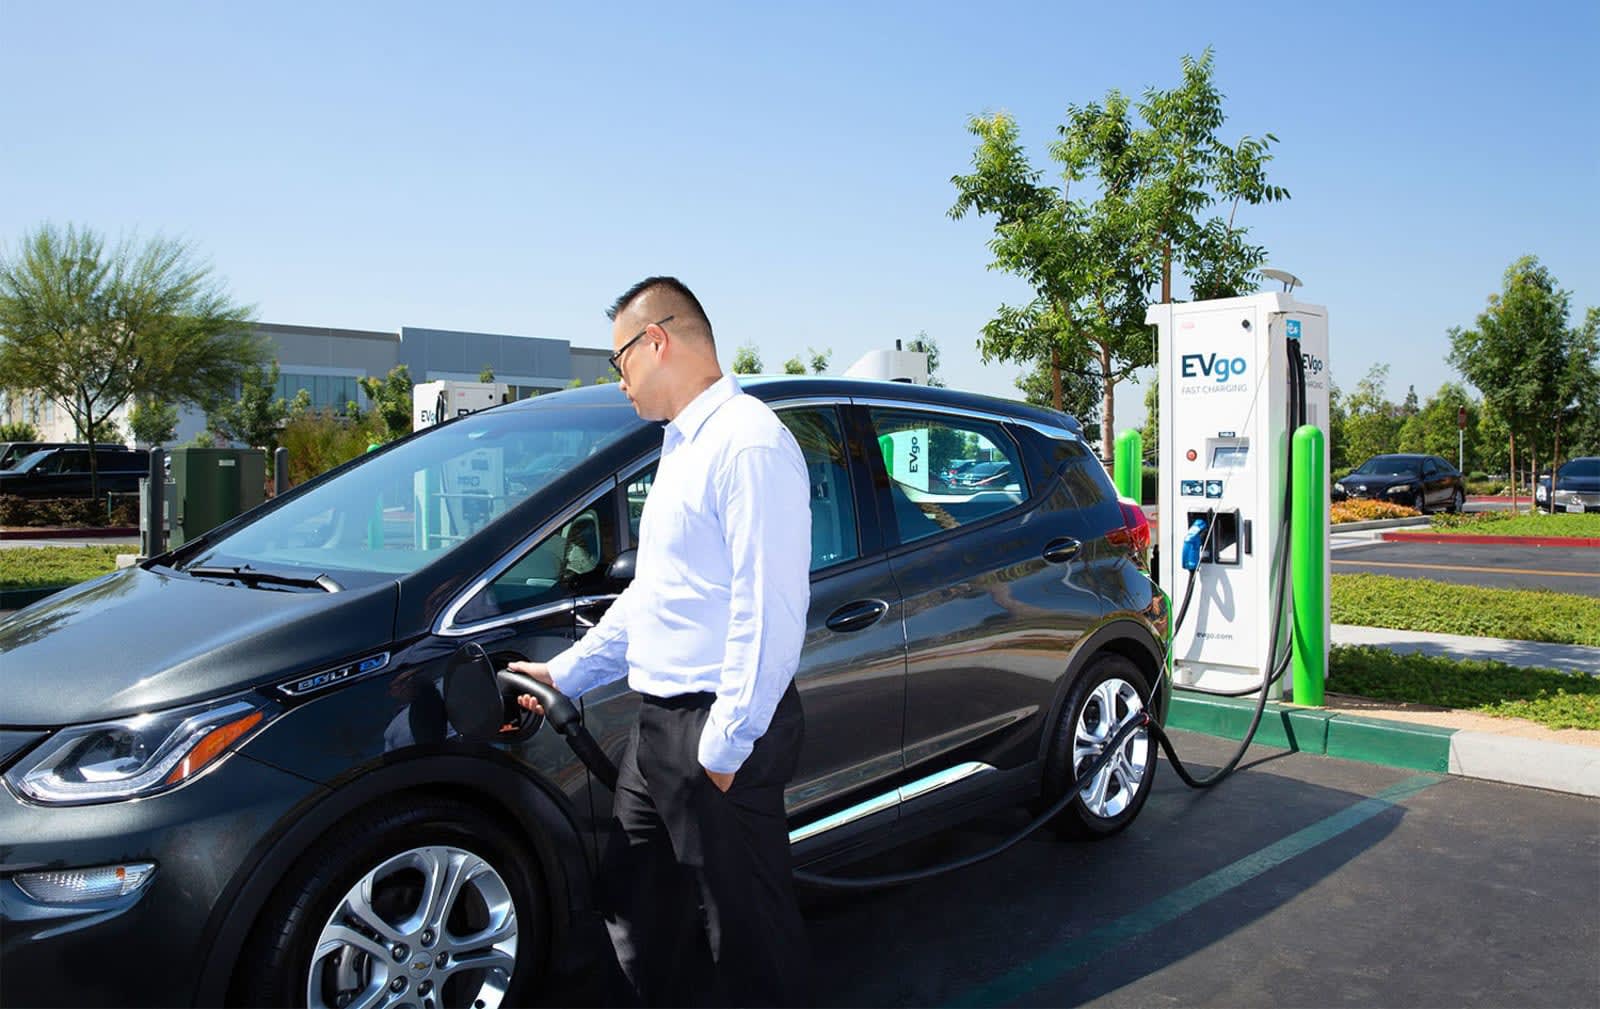 Chevy’s upcoming Bolt app will show real-time charging station status1600 x 1009